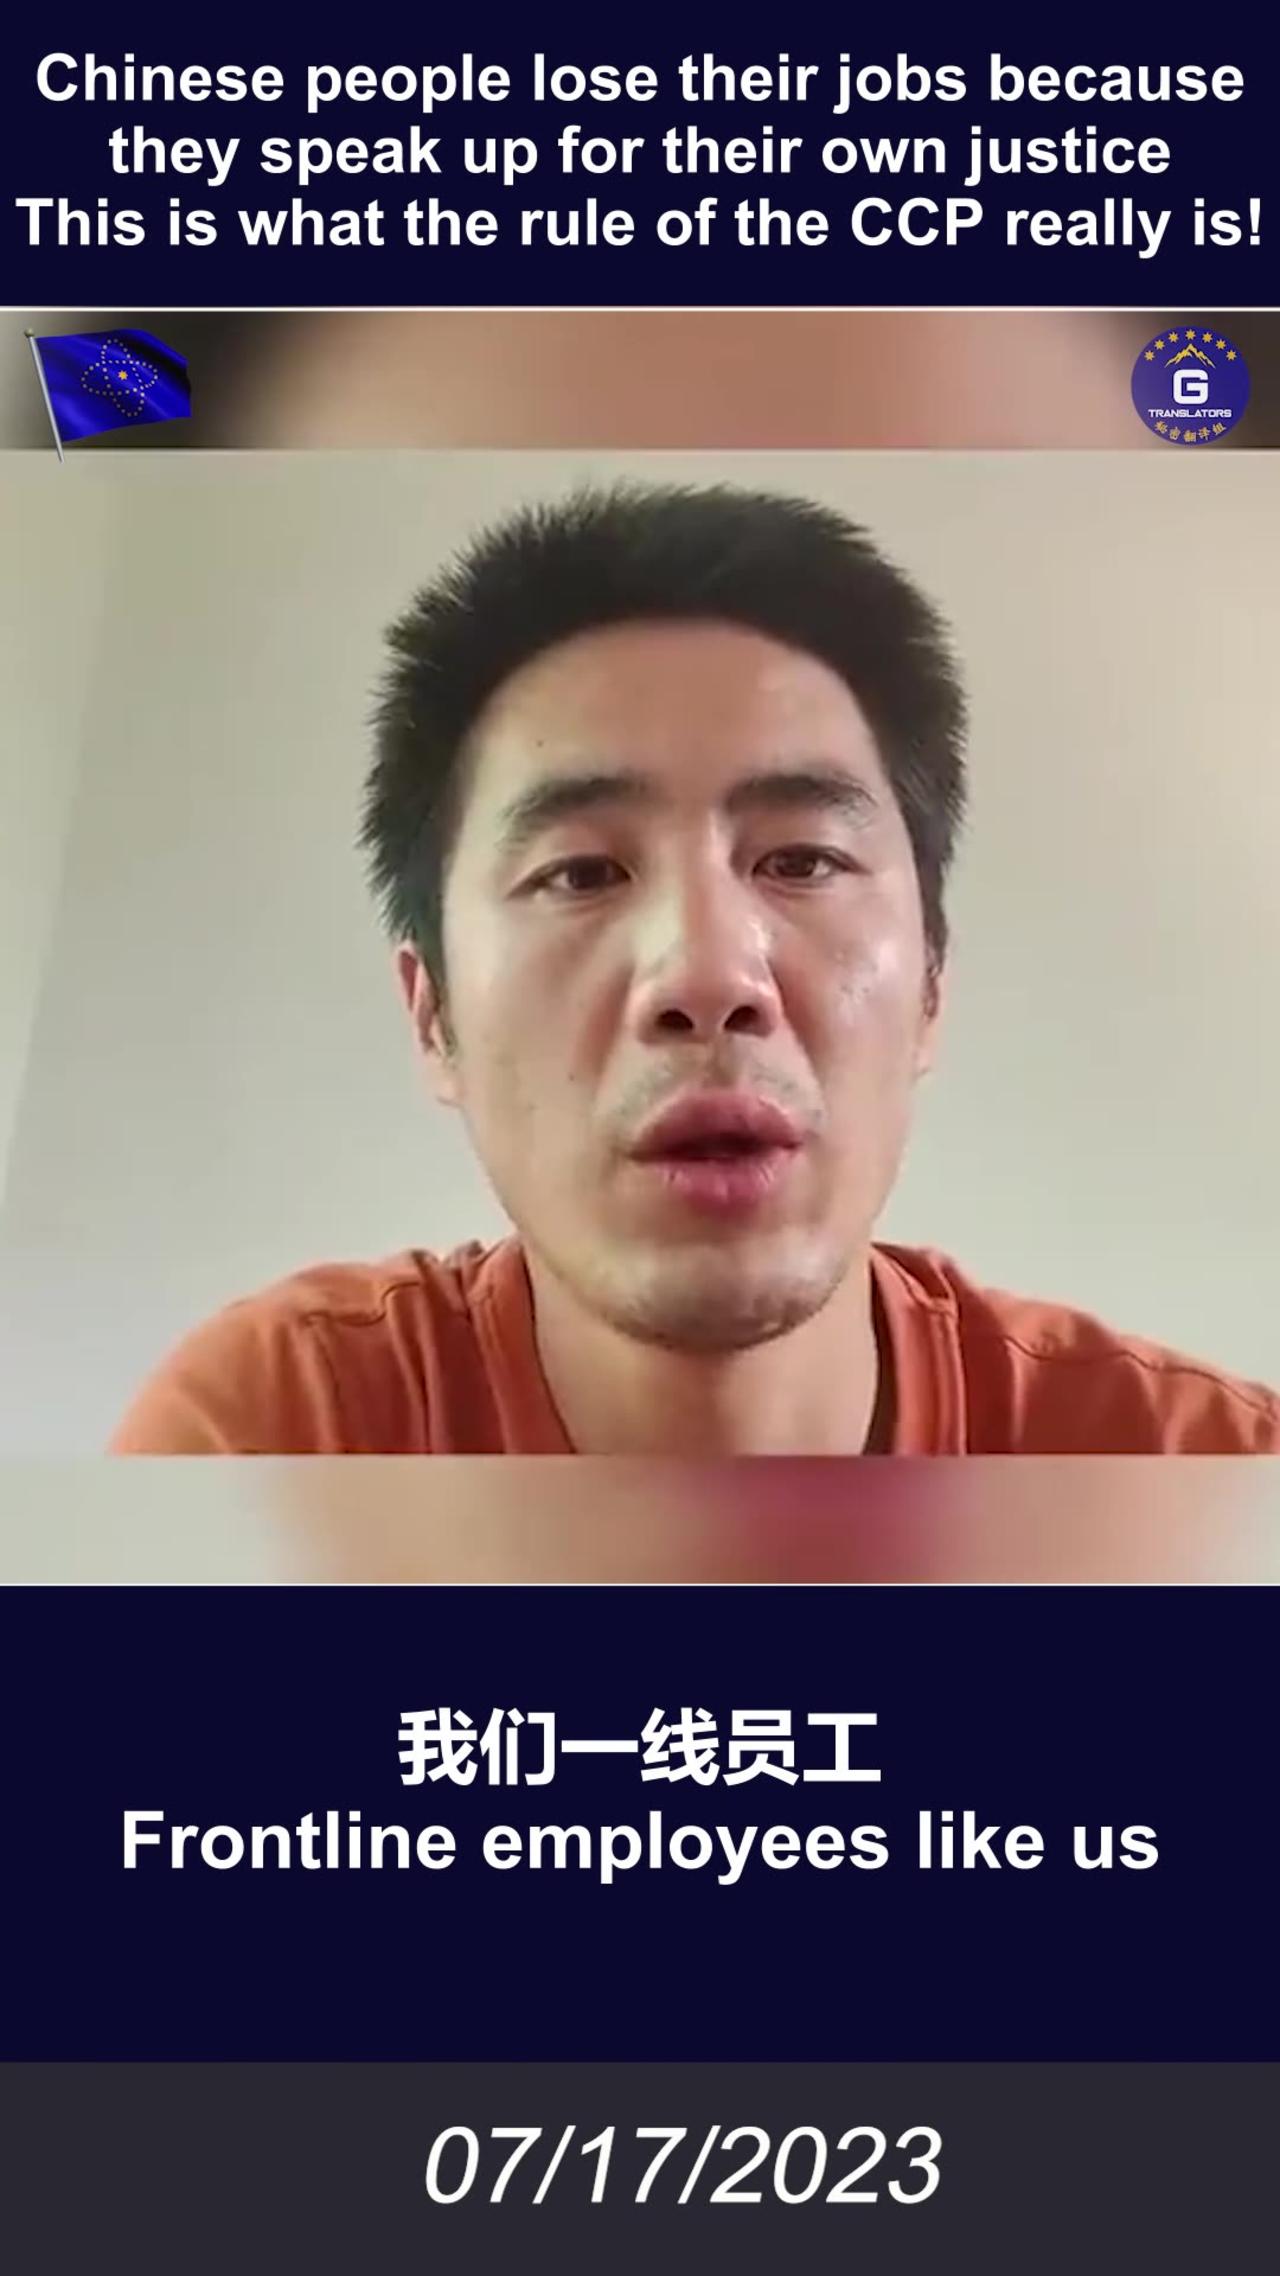 Chinese people lose their jobs because they speak up for their own justice